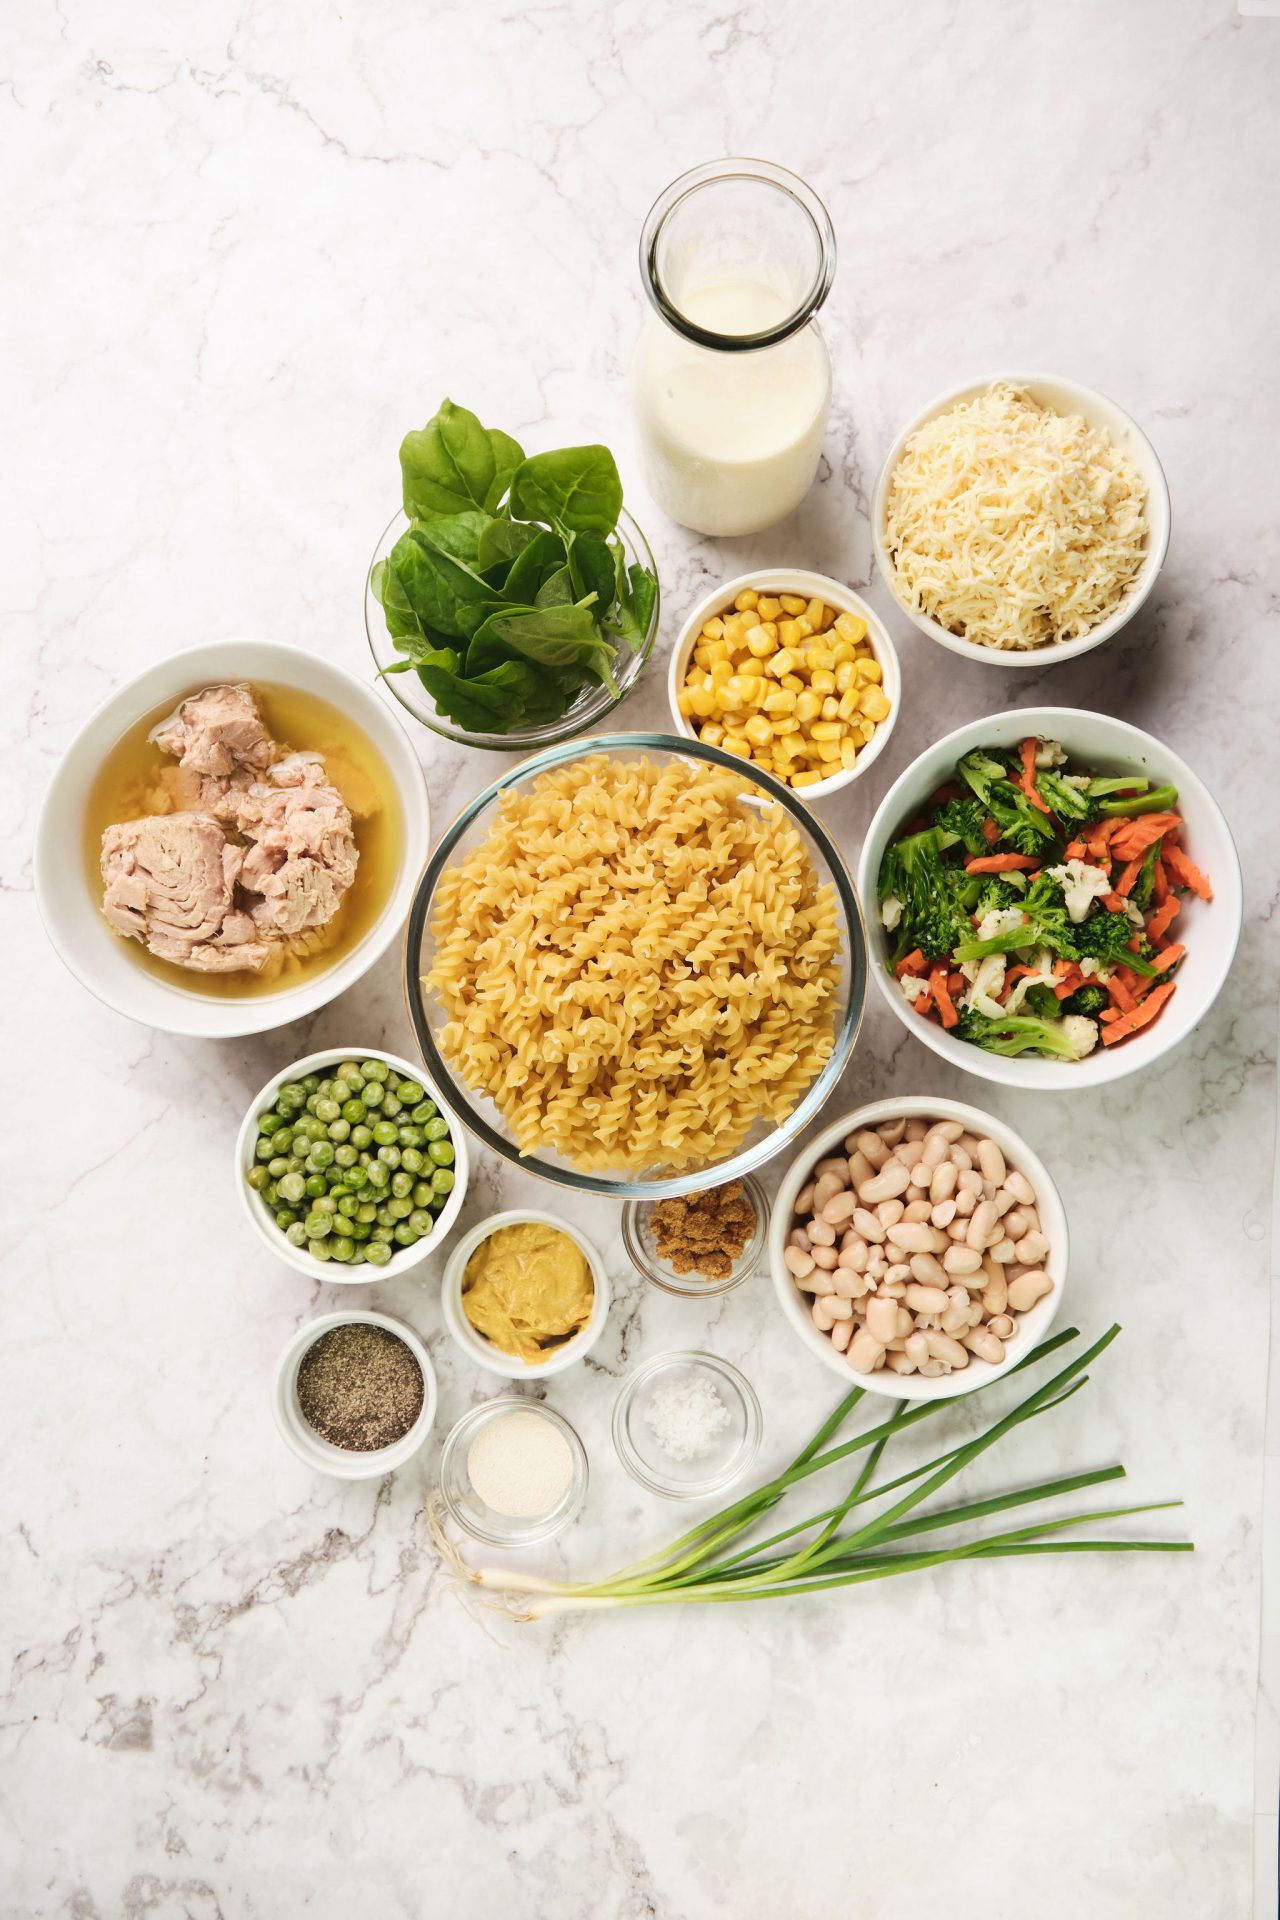 Flatlay of ingredients to make tuna pasta bake including dried spiral pasta, canned tuna, frozen vegetables, milk, cannellini beans and shredded cheese